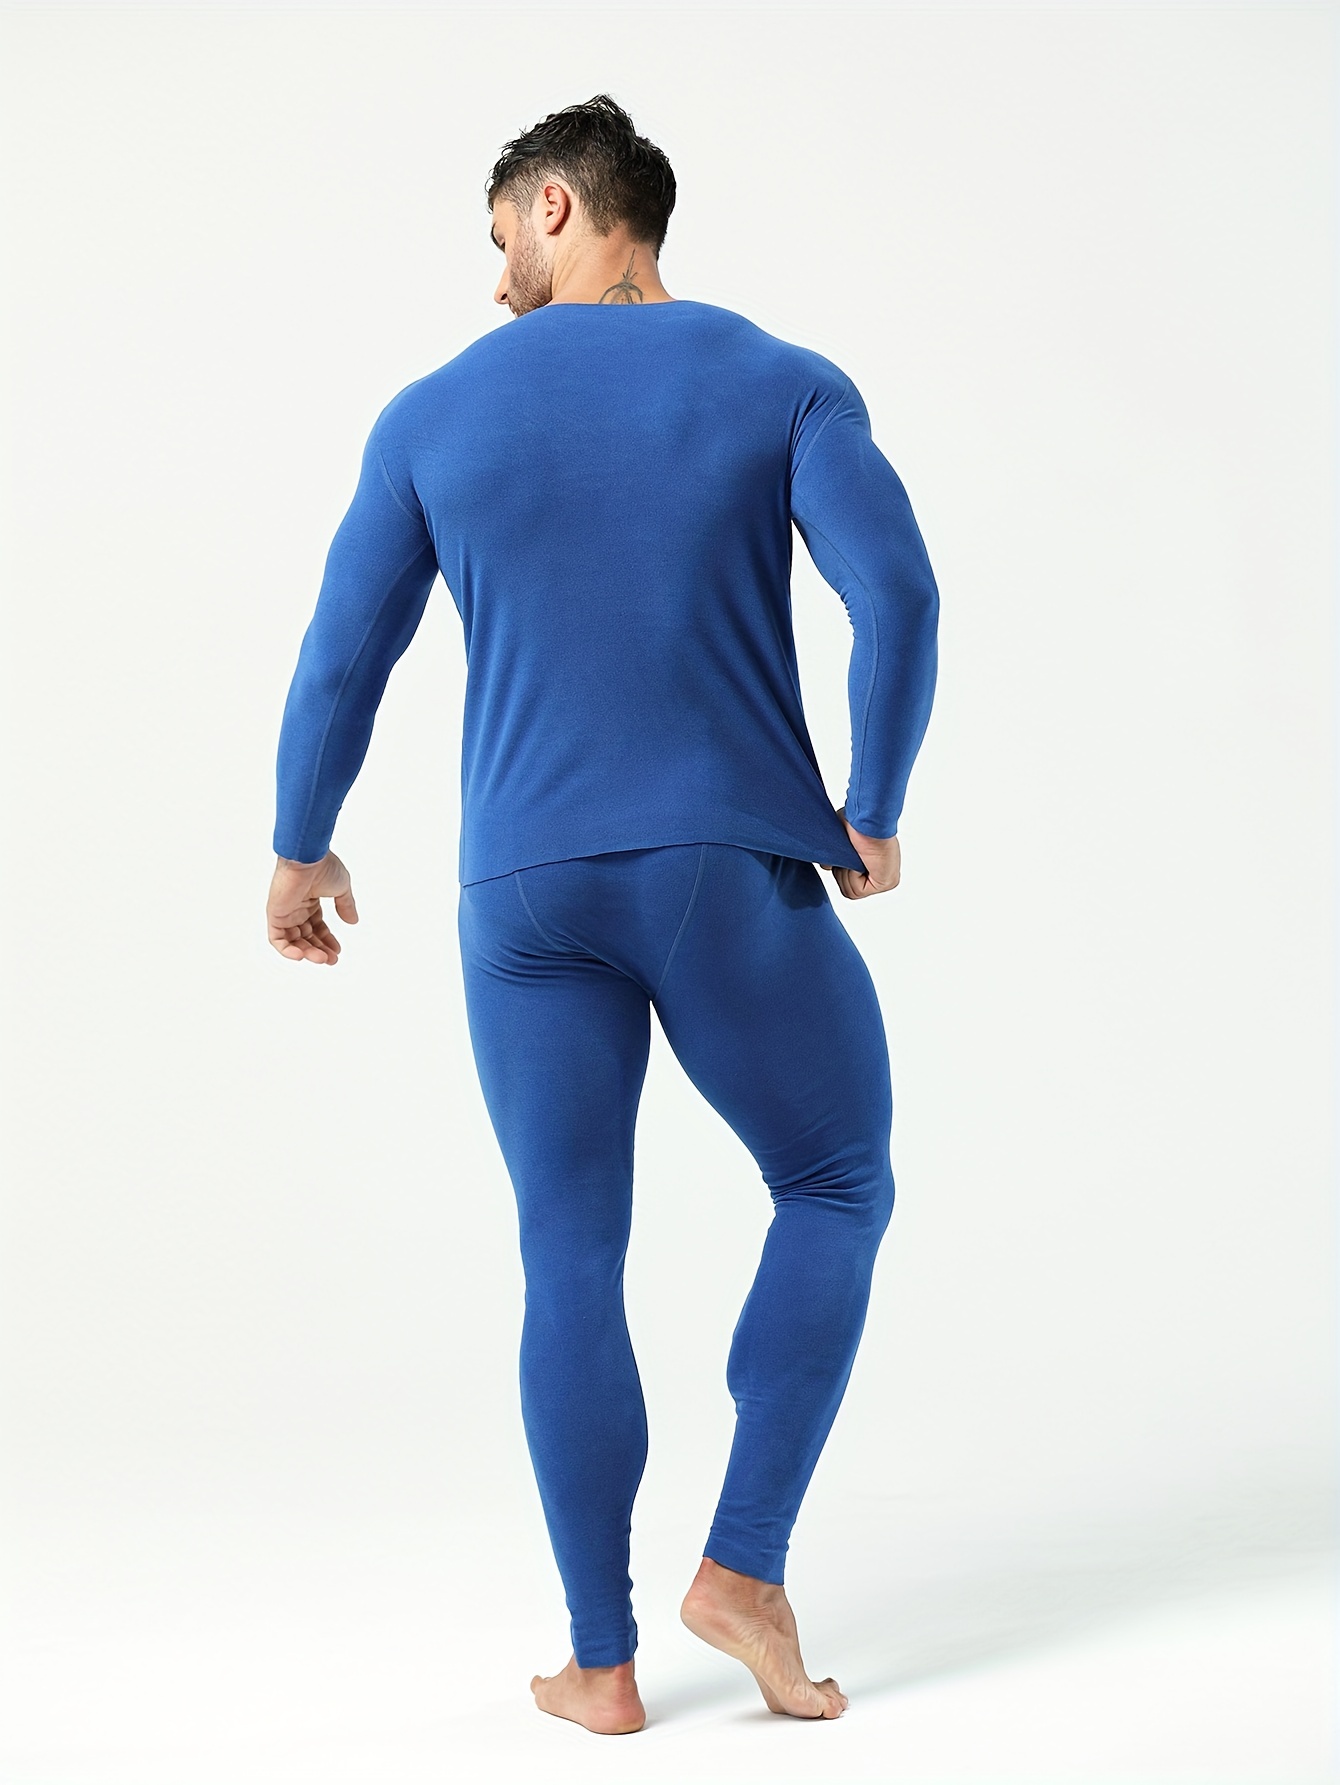 Men's Thermal Solid Colors Underwear Set Skiing Winter Warm Base Layers  Tight Long Johns Top & Bottom Set with Fleece Lined for Cold Weather